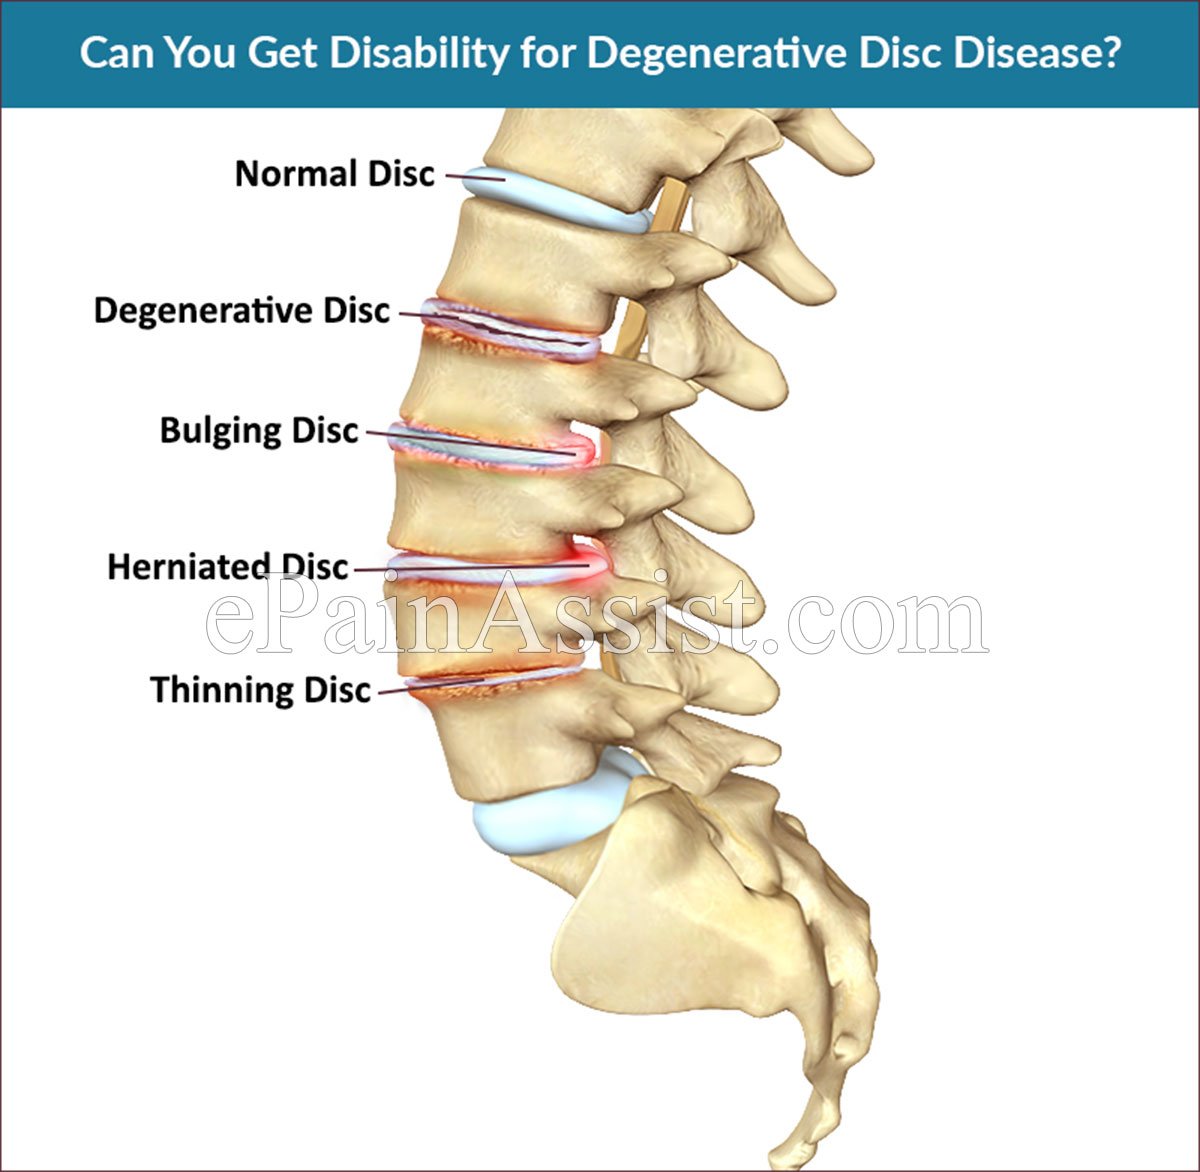 Does Degenerative Disc Disease Qualify For Disability ...